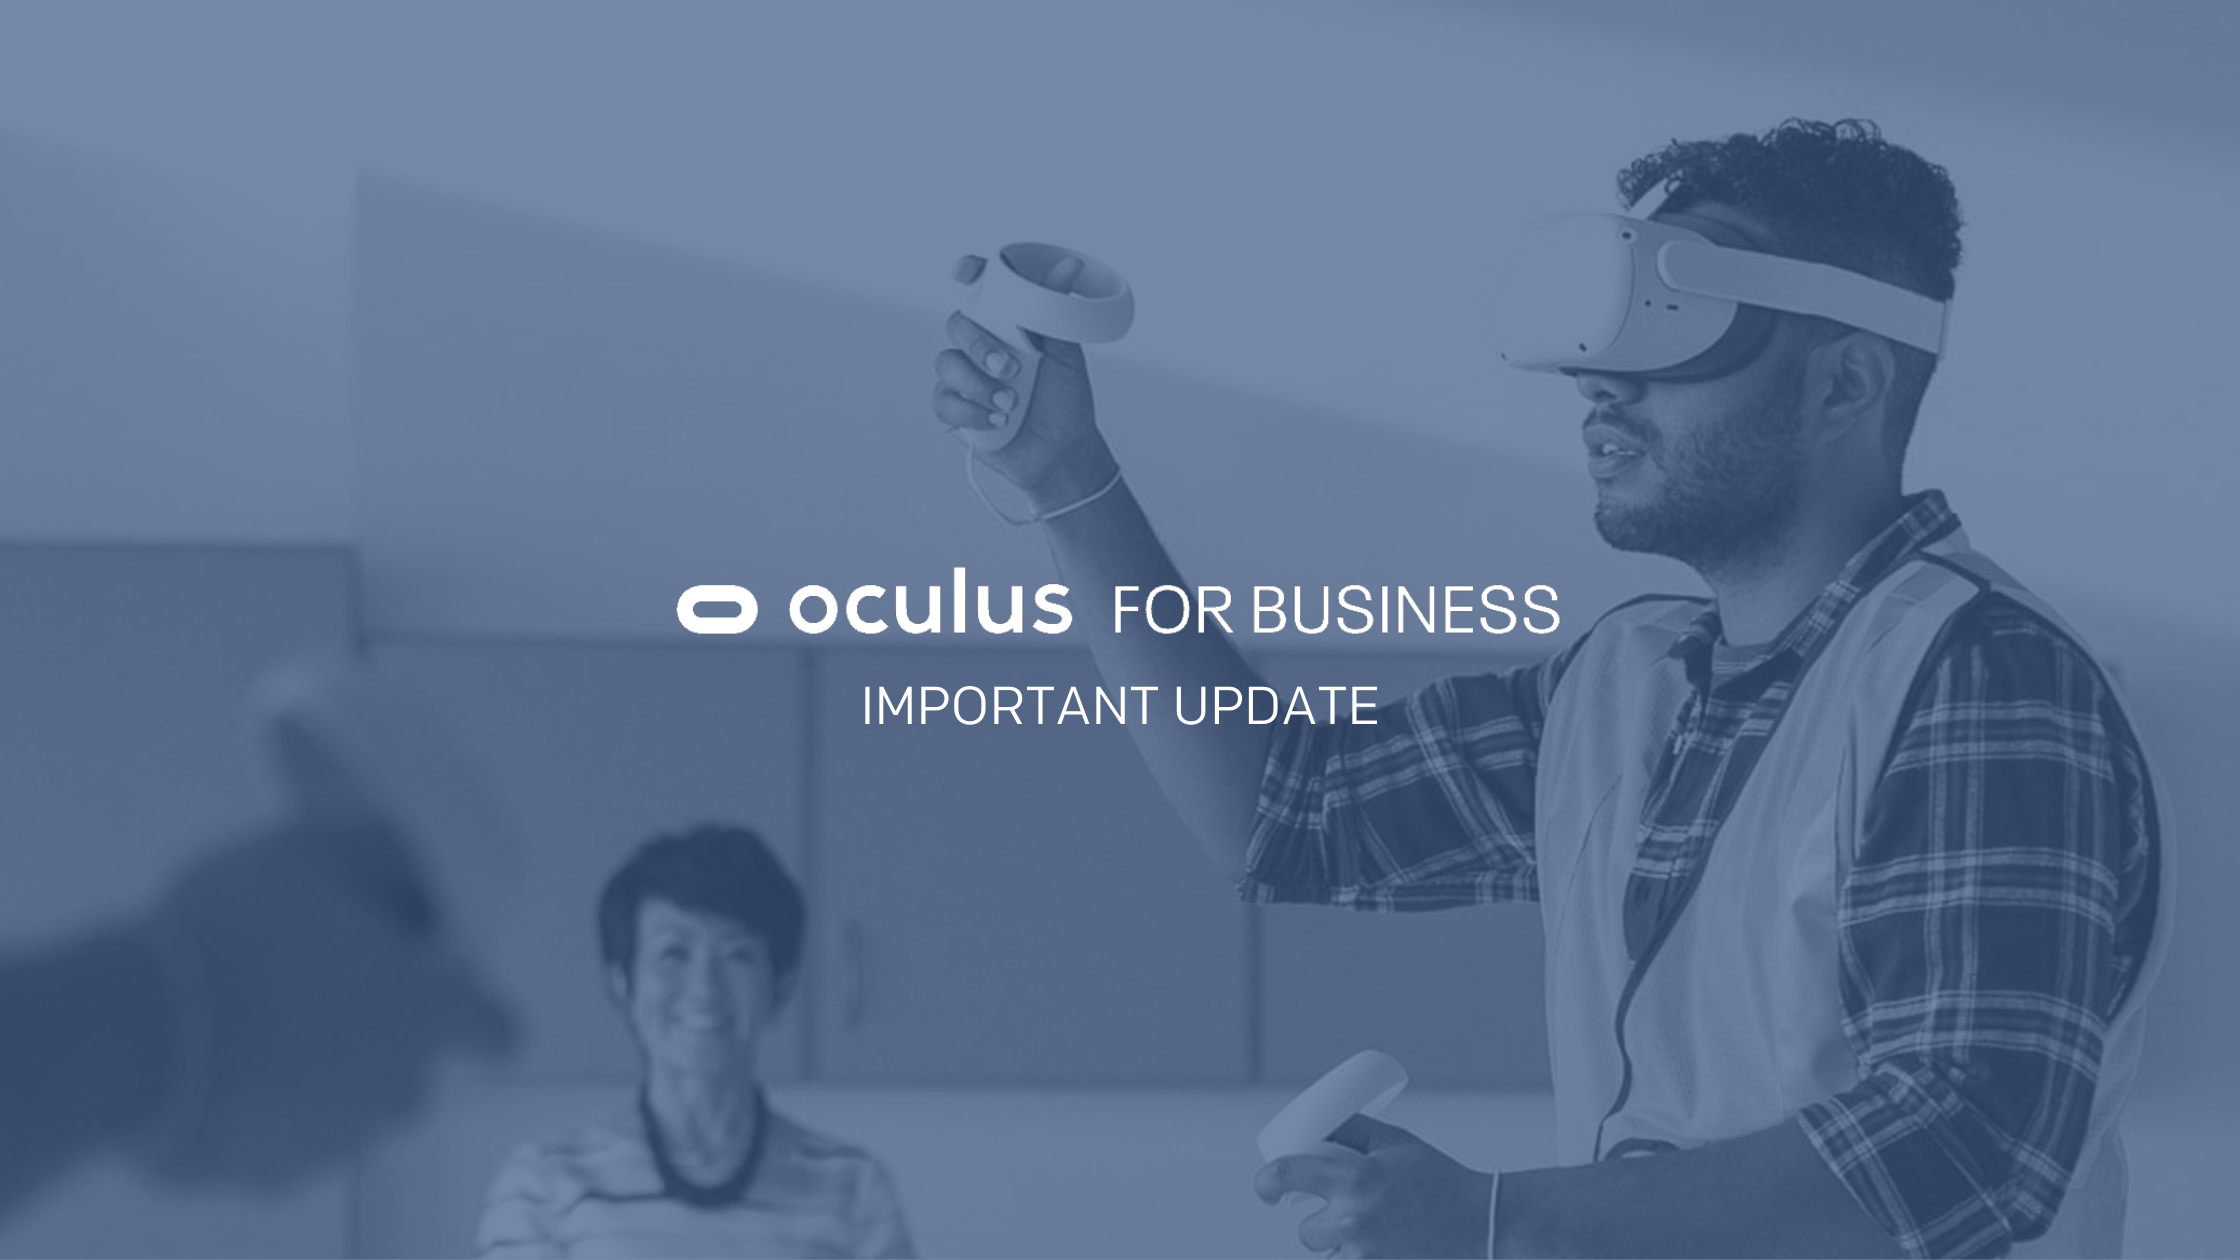 Oculus for Business Important Update